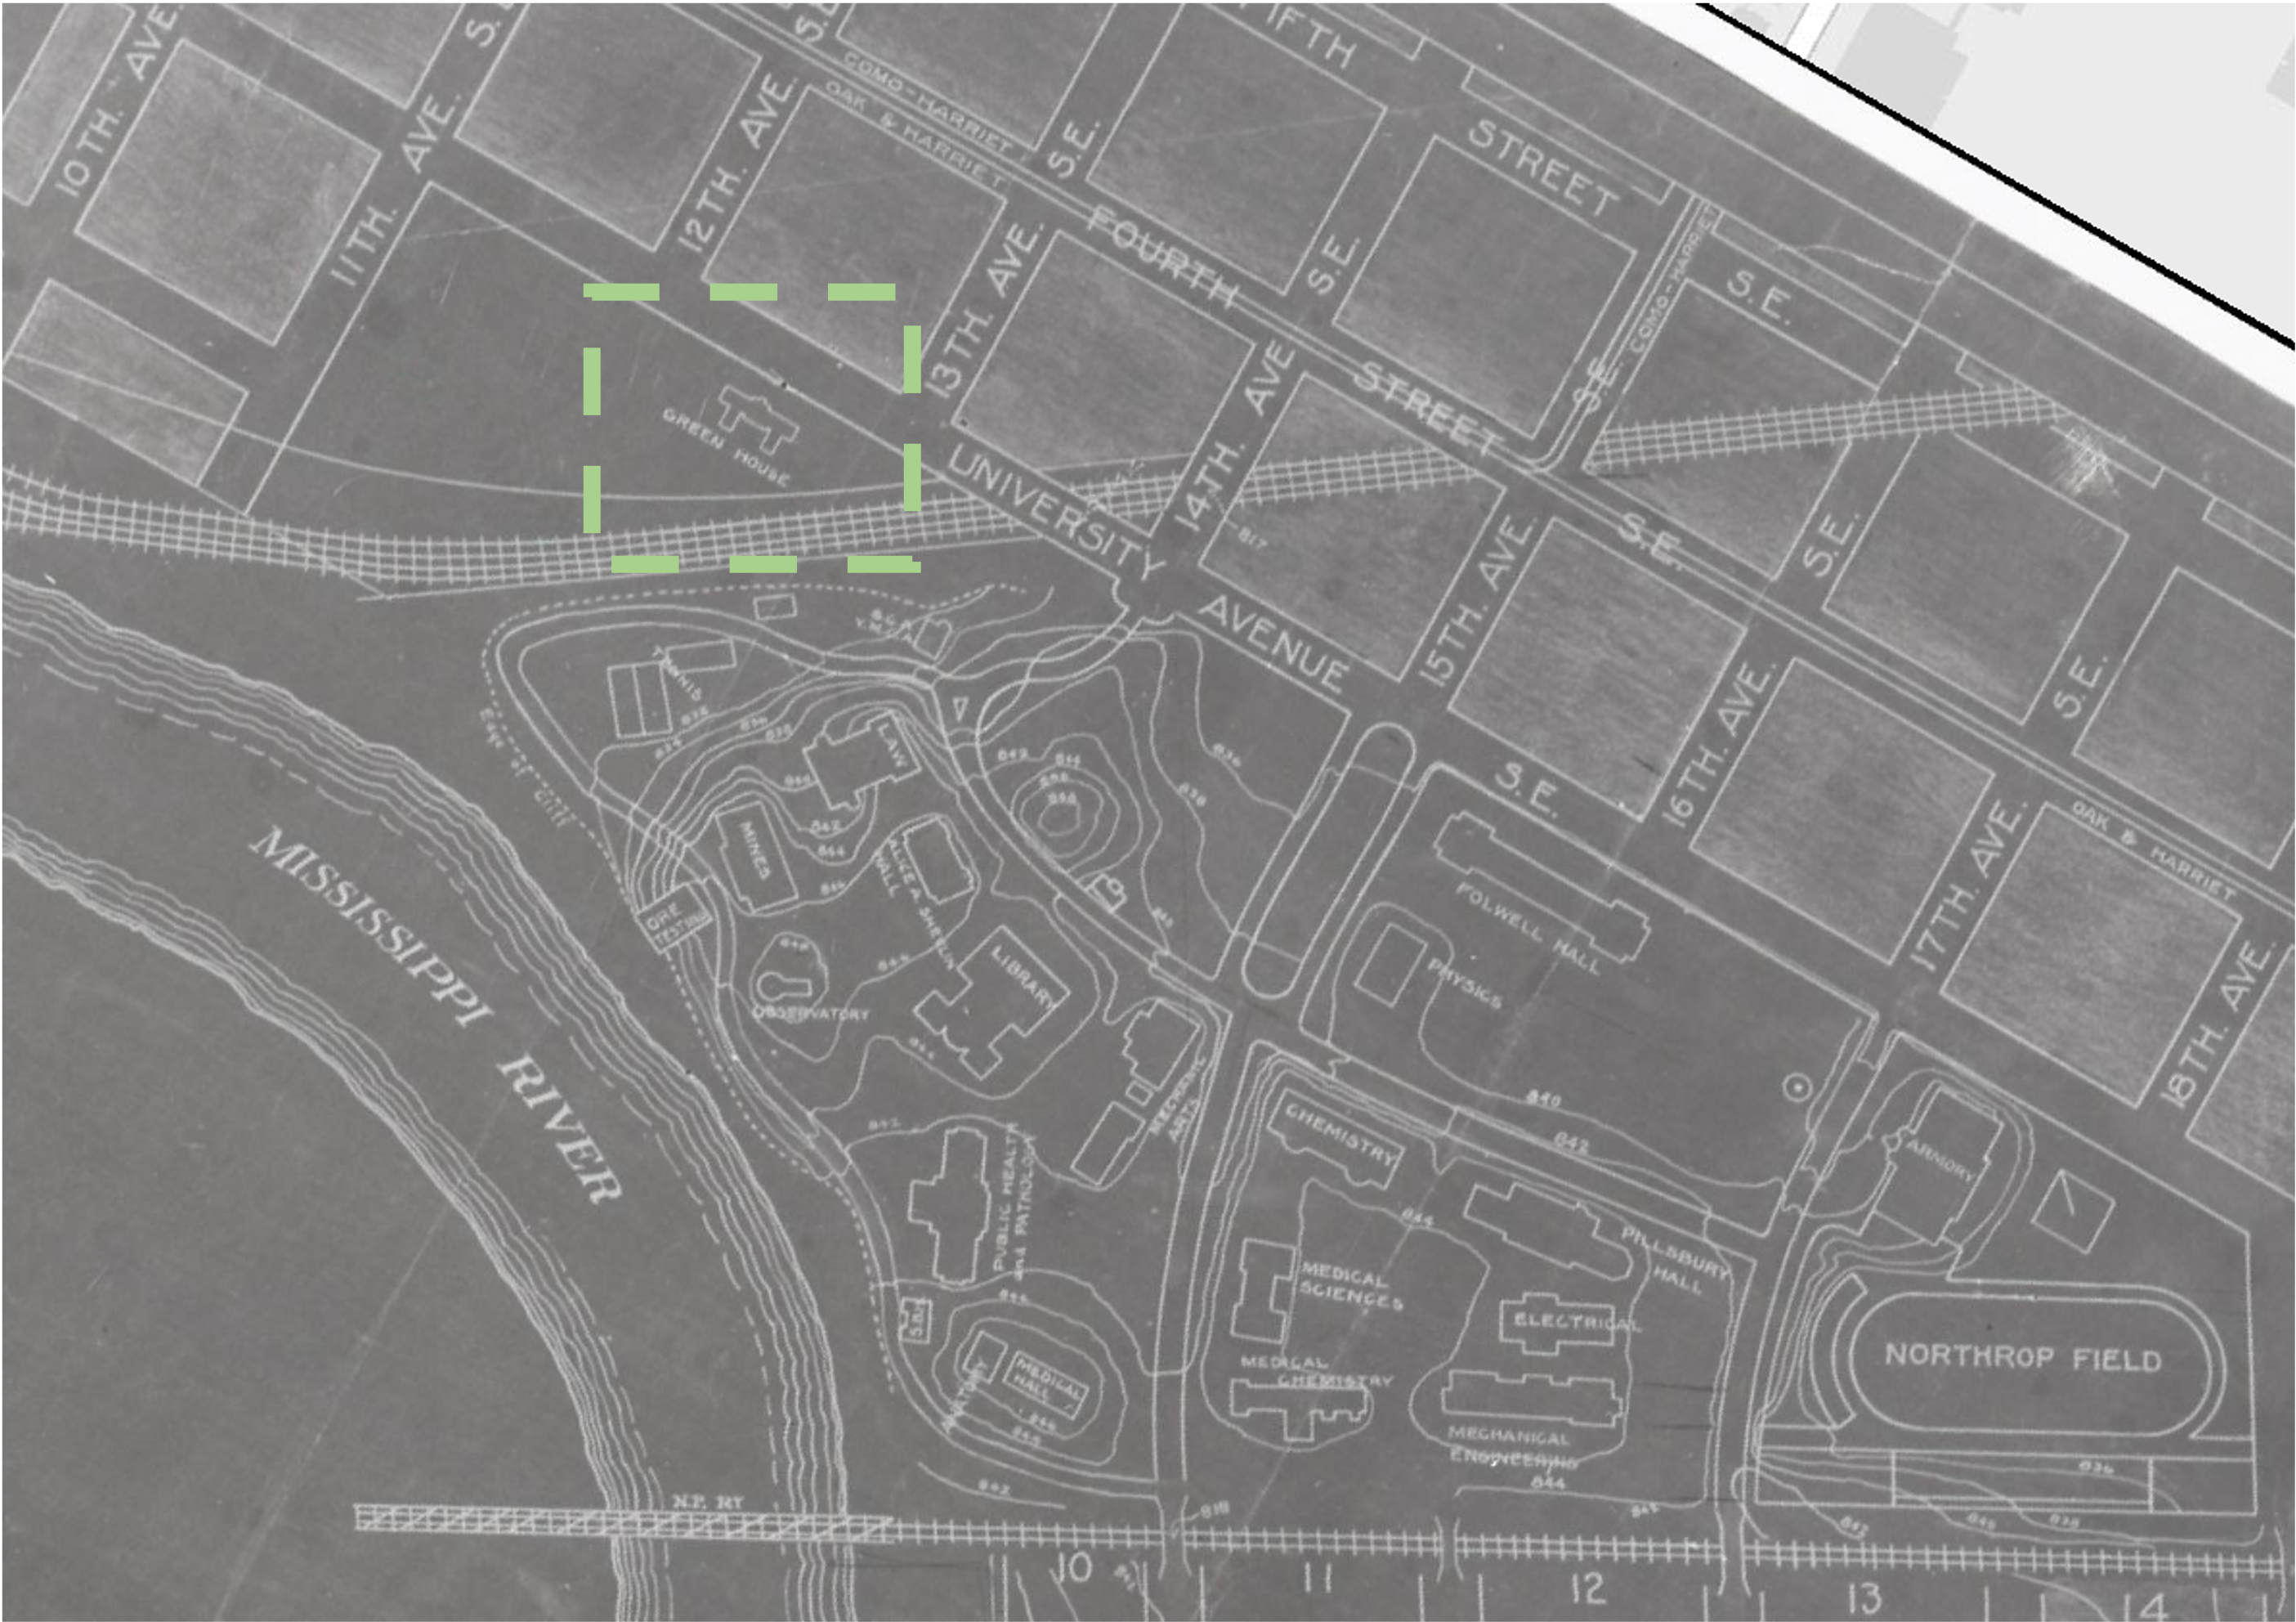 Aerial map of the University campus circa 1910 with the greenhouse facilities highlighted in green.